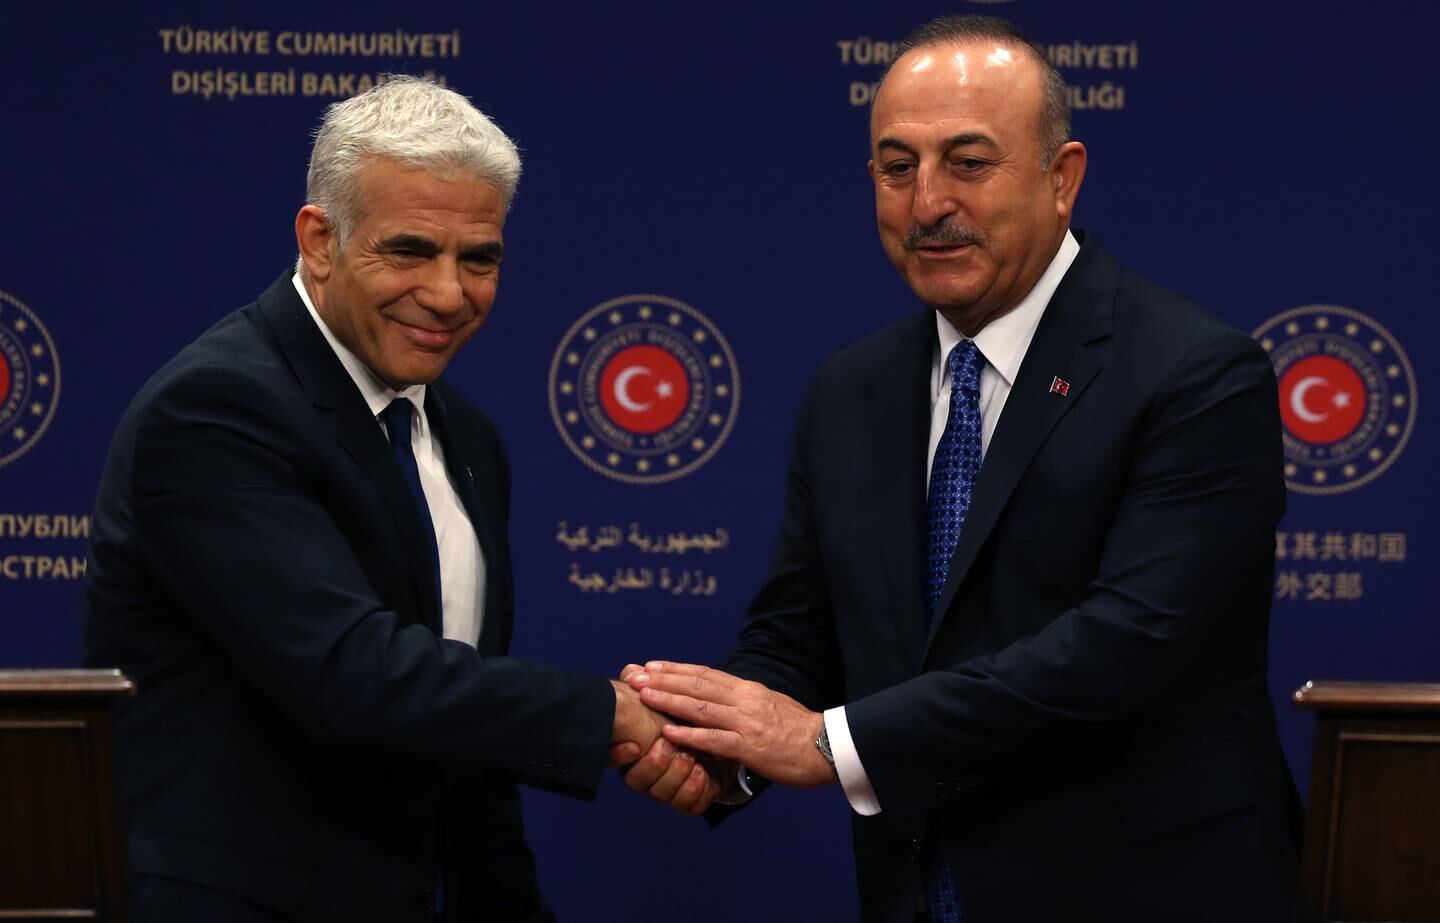 Turkish Foreign Minister Mevlut Cavusoglu (R) and Israeli Foreign Minister Yair Lapid (L) attend a press conference after their meeting in Ankara, Turkey. EPA / STR